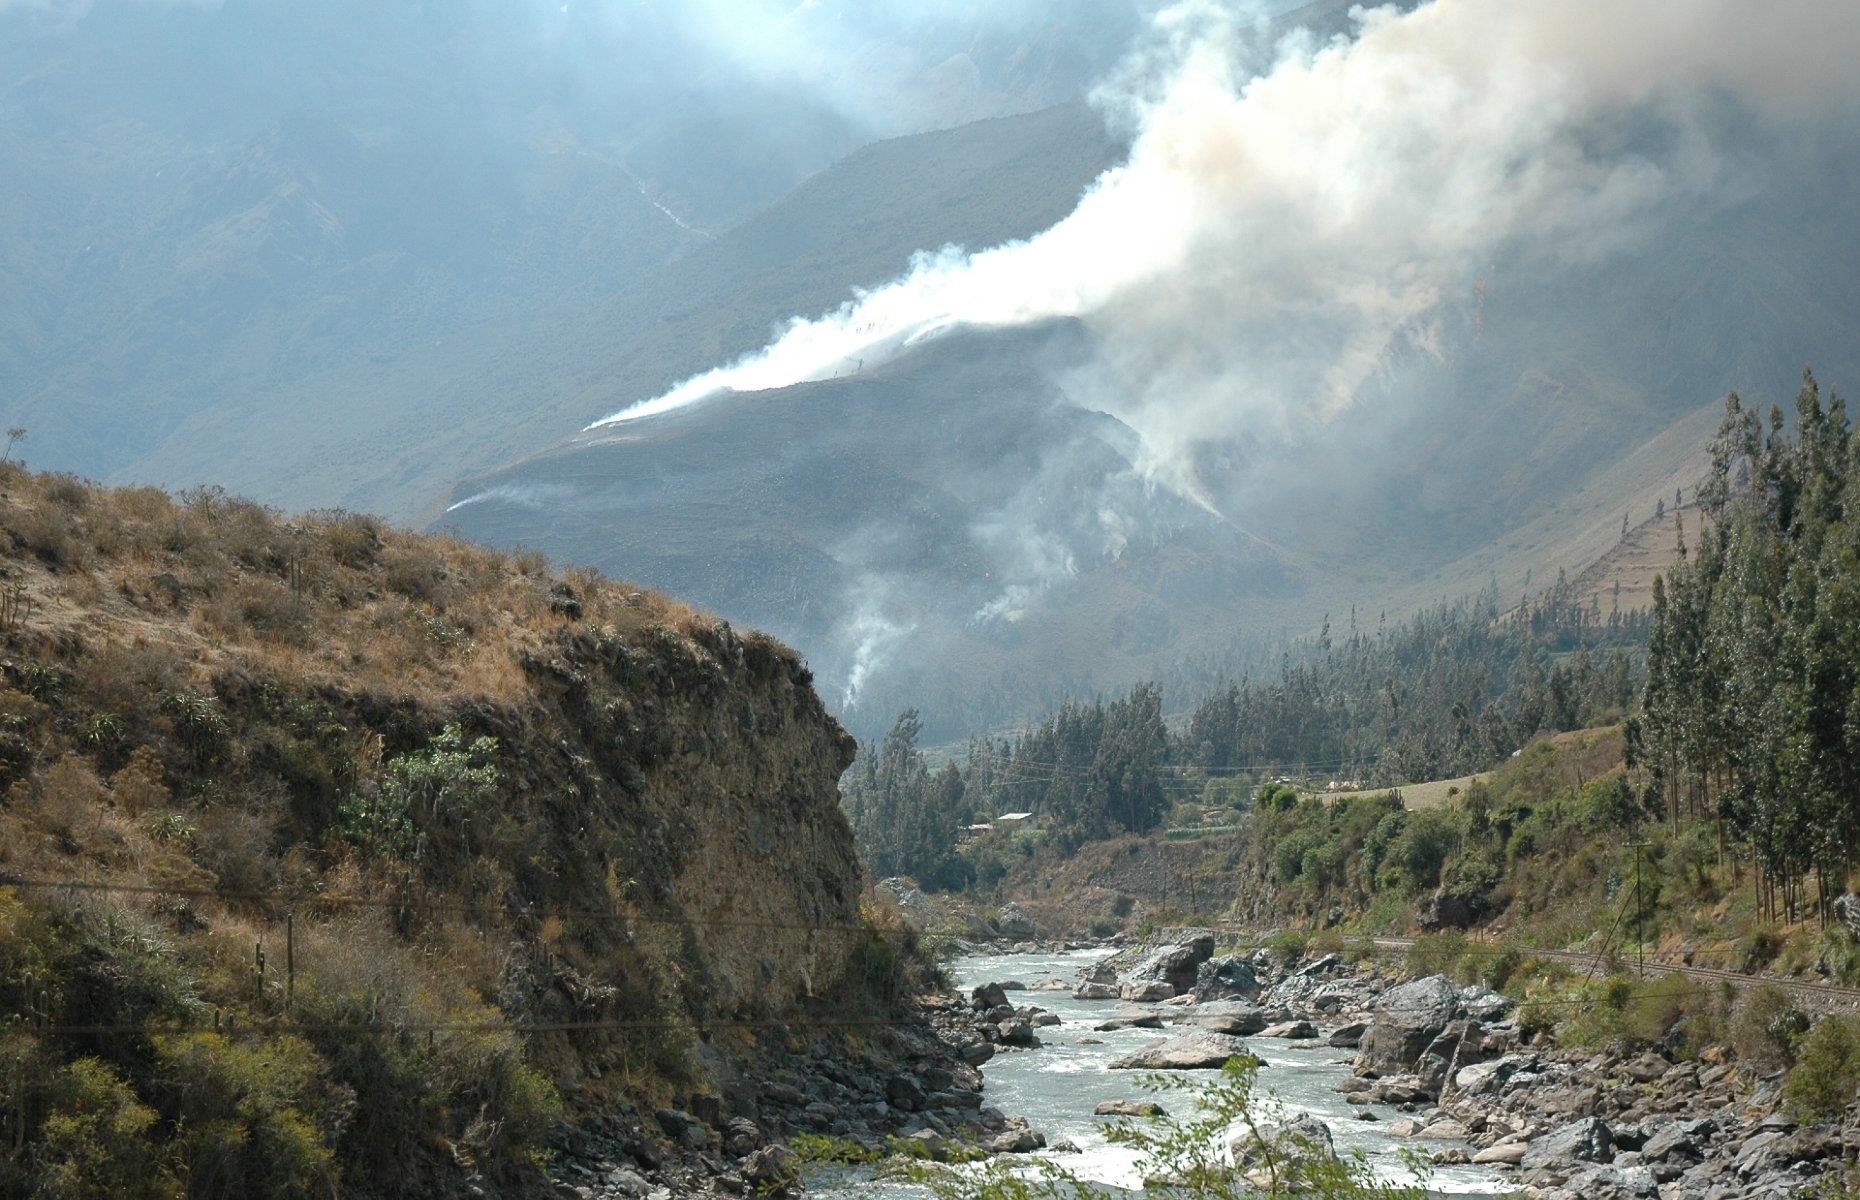 <p>Hidden deep in the Eastern Cordillera mountain ridge, Machu Picchu, Peru’s most popular tourist destination, has recently been put at risk due to wildfires. In 2021, the number of wildfires rose to 333 for the whole year – and the ancient city was threatened again by encroaching bush blazes in 2022.</p>